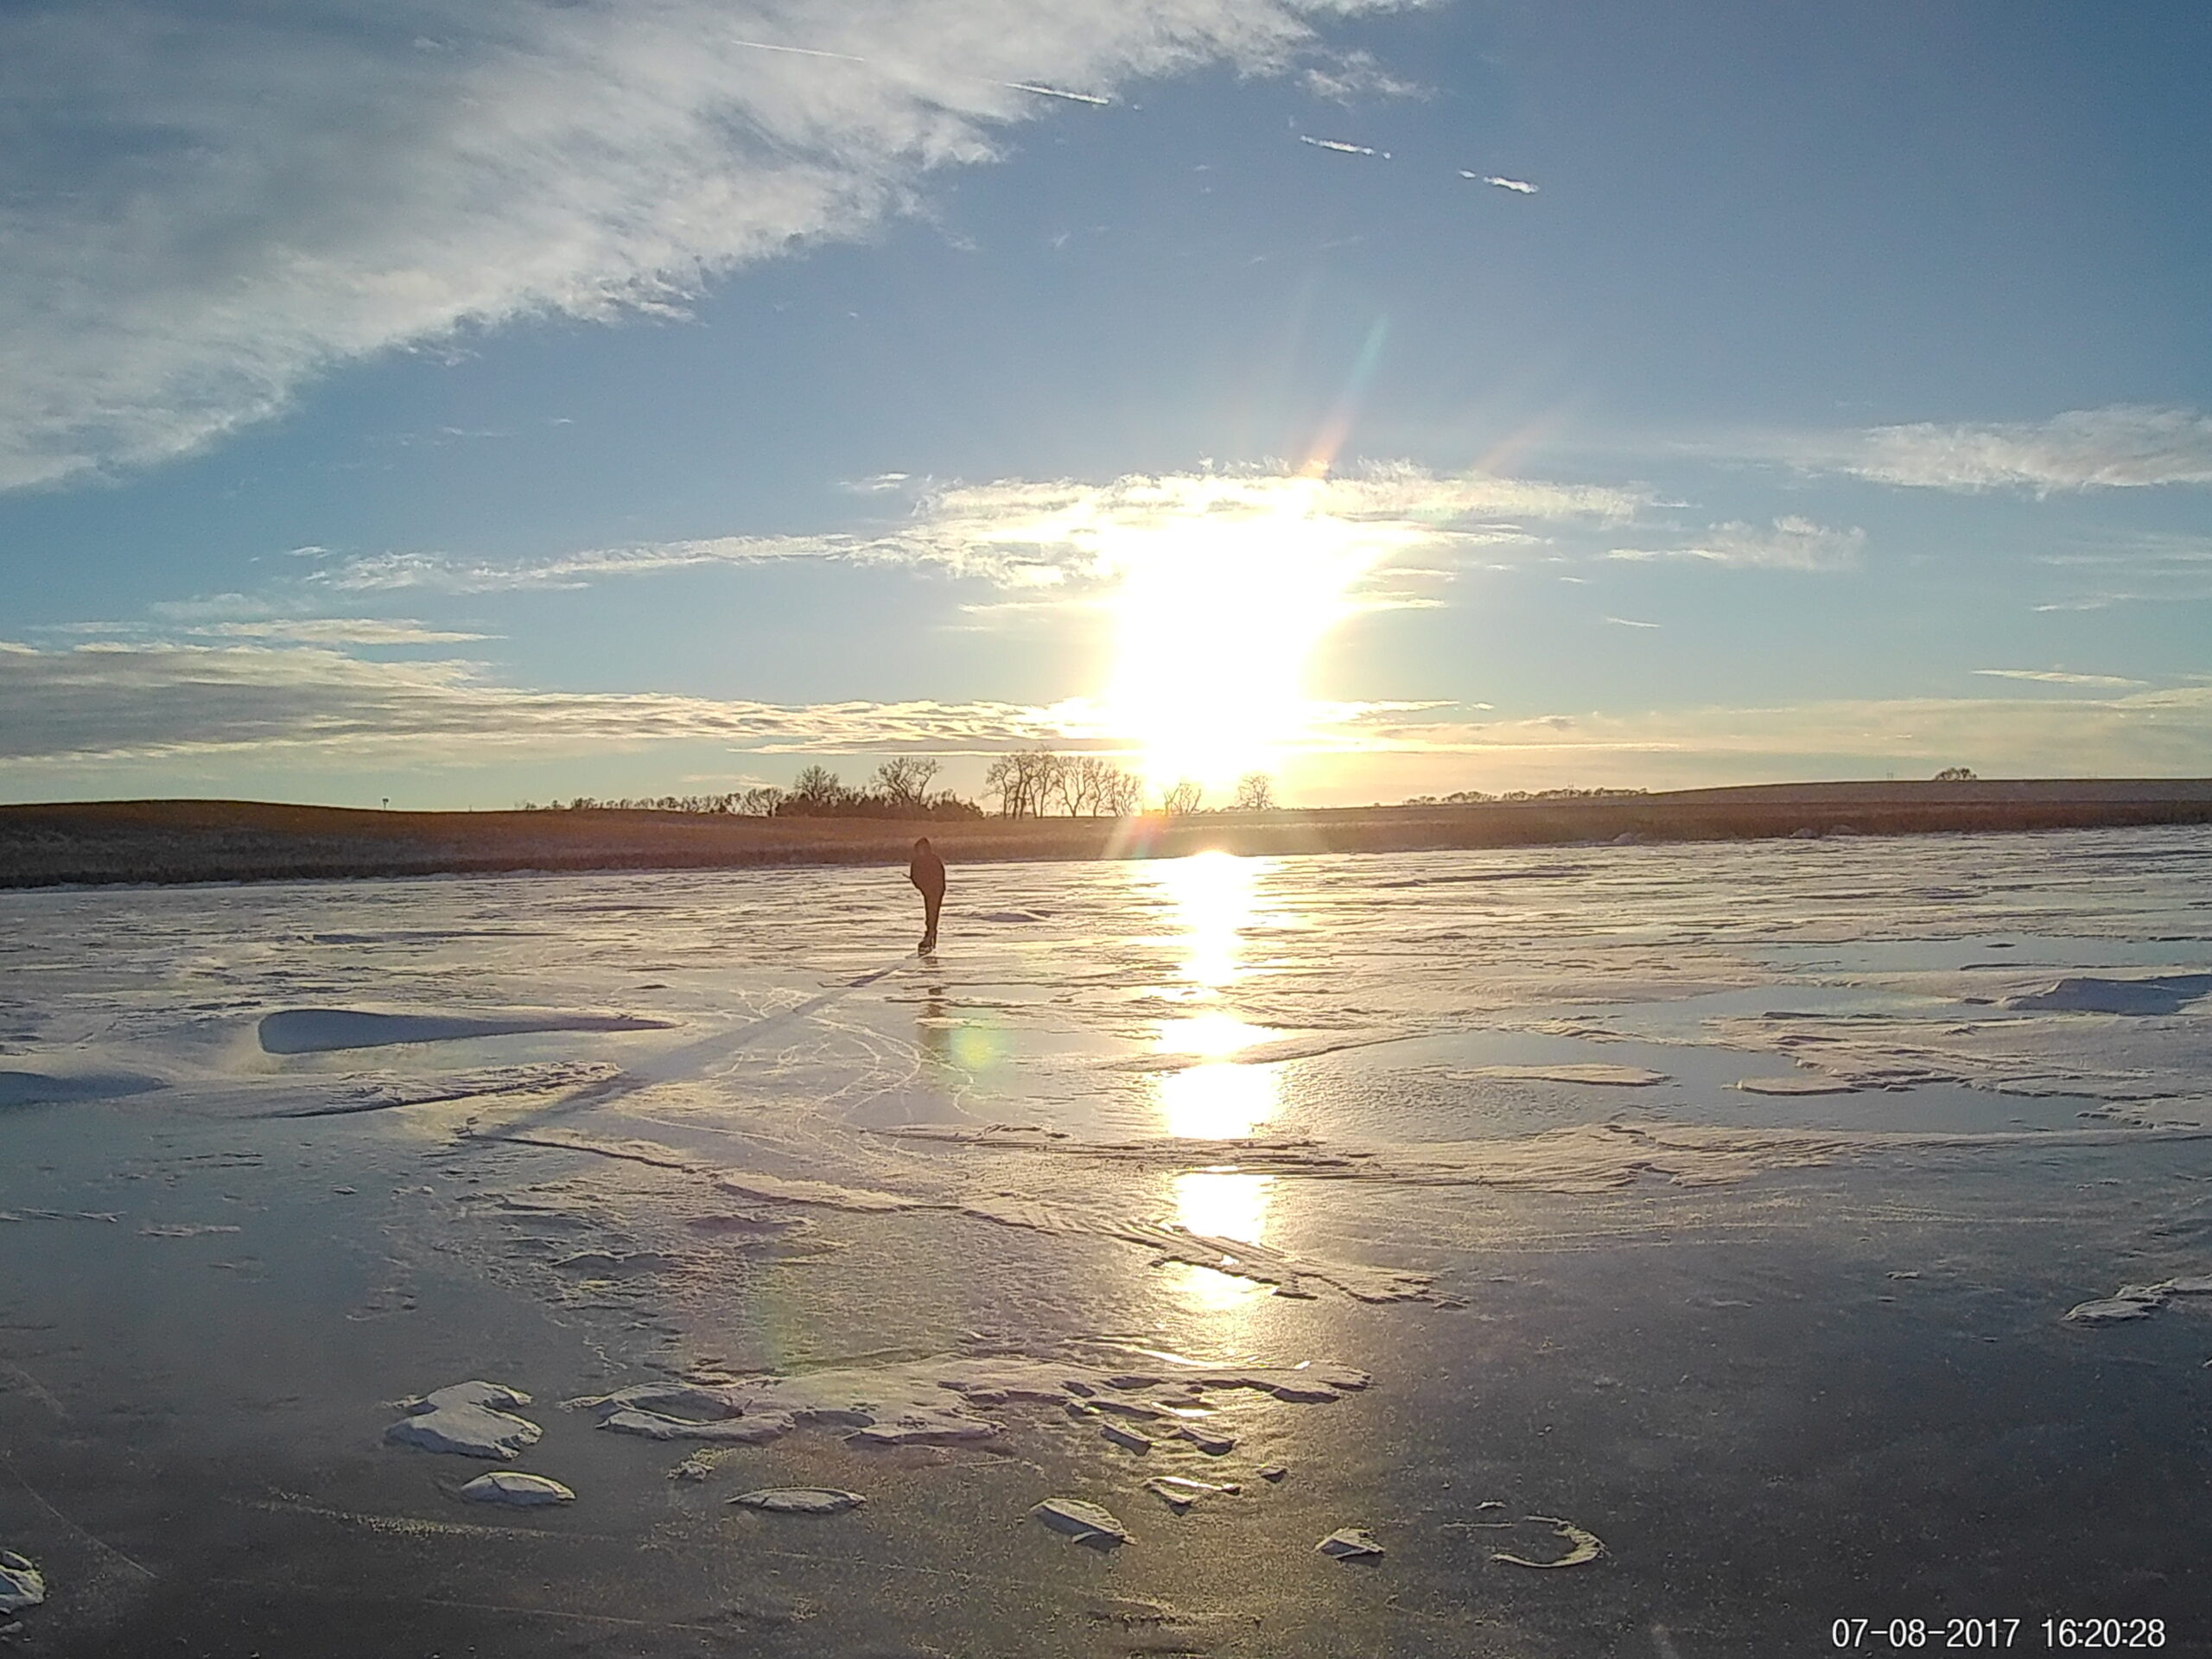 Ice Skating at Sunset on Pond